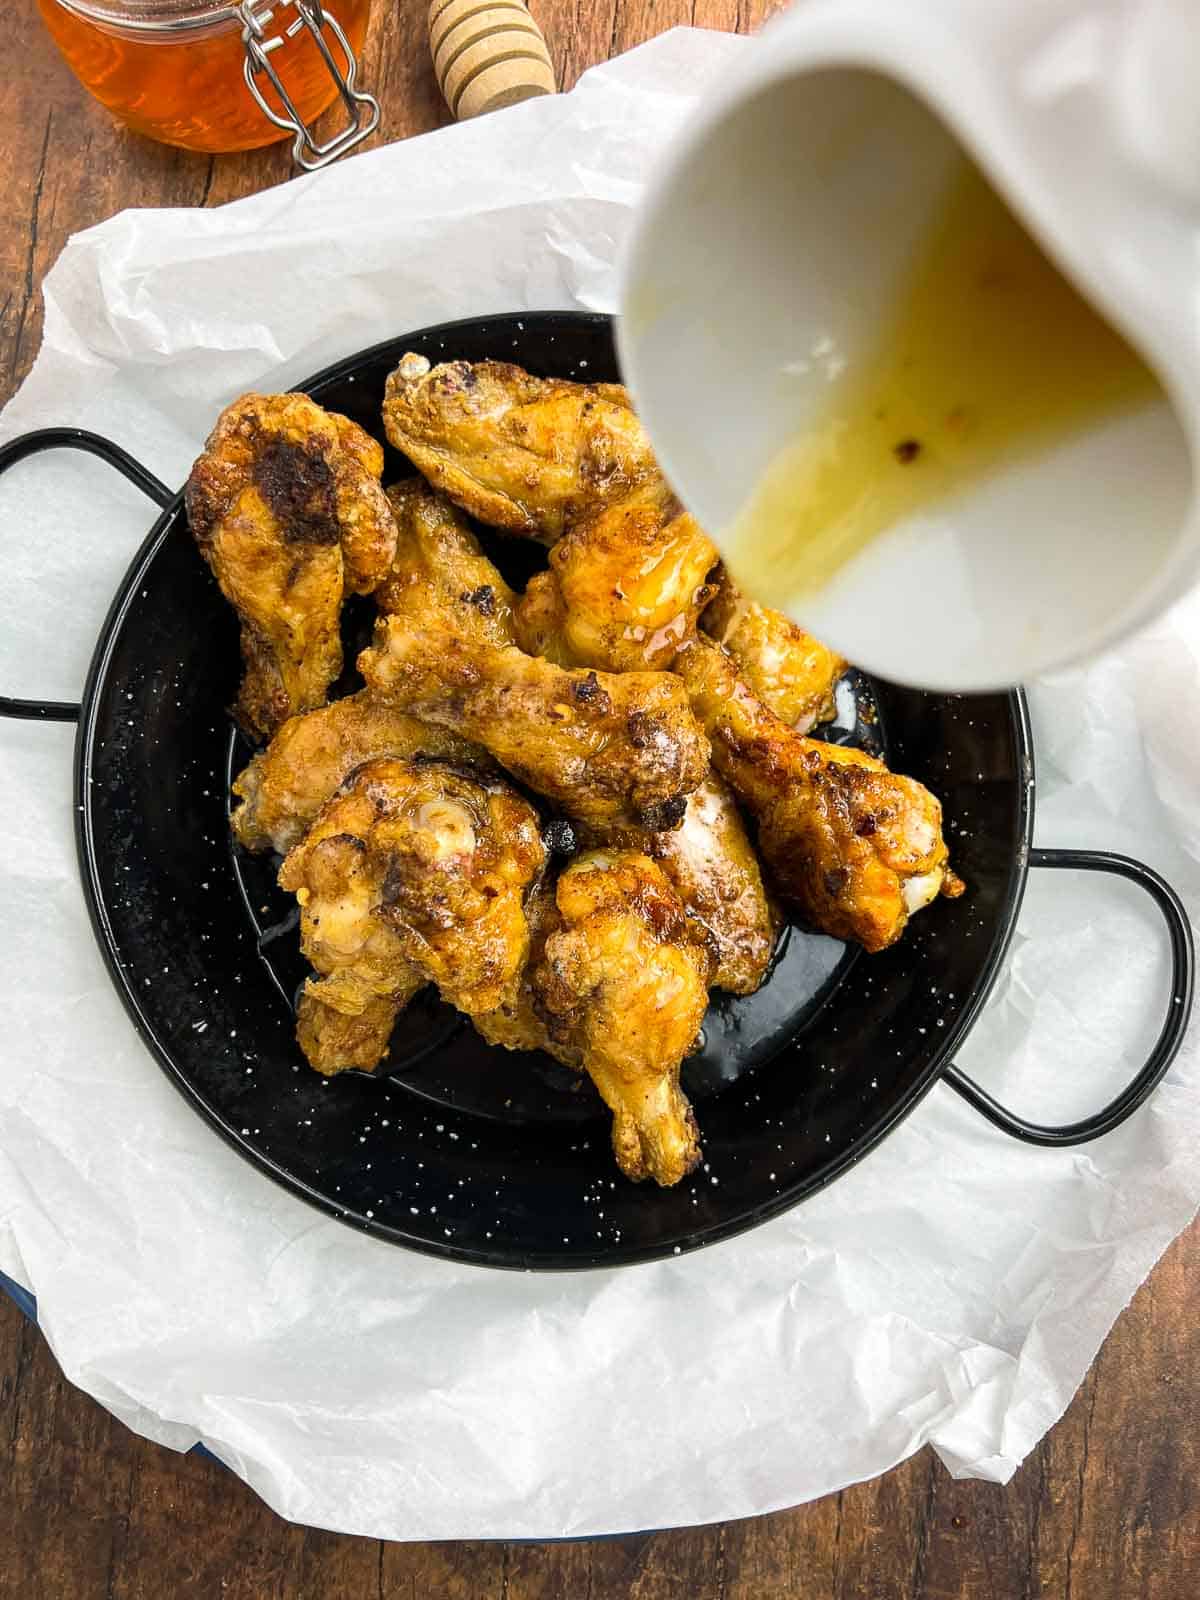 Drizzling hot honey sauce on air fried chicken wings.